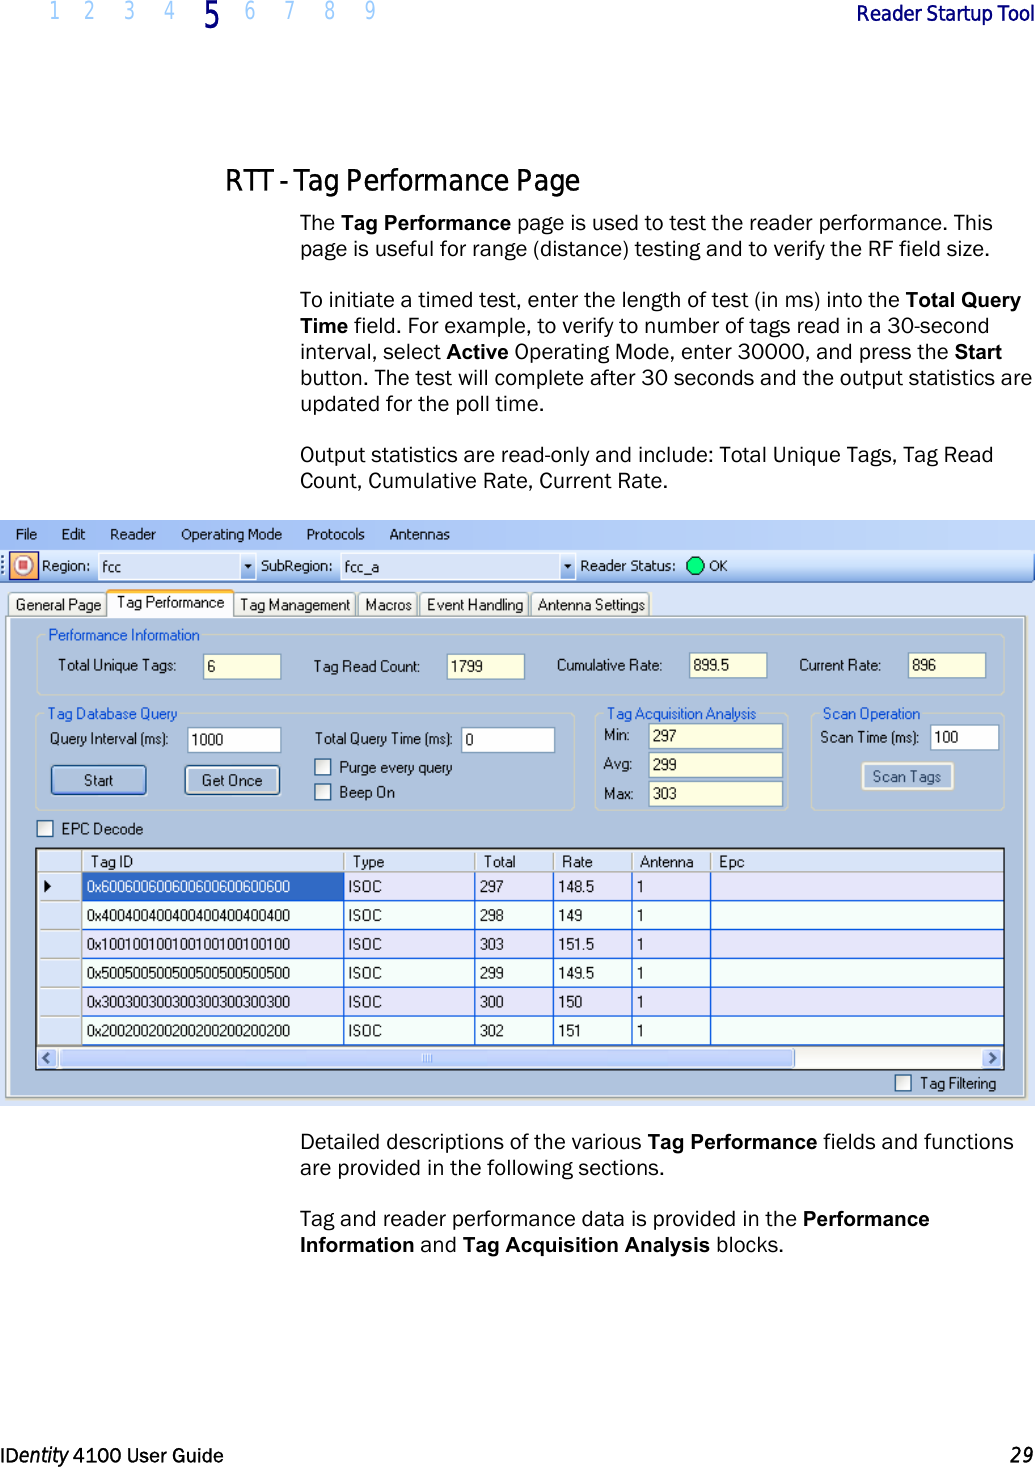  1 2 3 4 5 6 7 8 9       Reader Startup Tool   IDentity 4100 User Guide  29  RTT - Tag Performance Page The Tag Performance page is used to test the reader performance. This page is useful for range (distance) testing and to verify the RF field size. To initiate a timed test, enter the length of test (in ms) into the Total Query Time field. For example, to verify to number of tags read in a 30-second interval, select Active Operating Mode, enter 30000, and press the Start button. The test will complete after 30 seconds and the output statistics are updated for the poll time. Output statistics are read-only and include: Total Unique Tags, Tag Read Count, Cumulative Rate, Current Rate.  Detailed descriptions of the various Tag Performance fields and functions are provided in the following sections. Tag and reader performance data is provided in the Performance Information and Tag Acquisition Analysis blocks. 